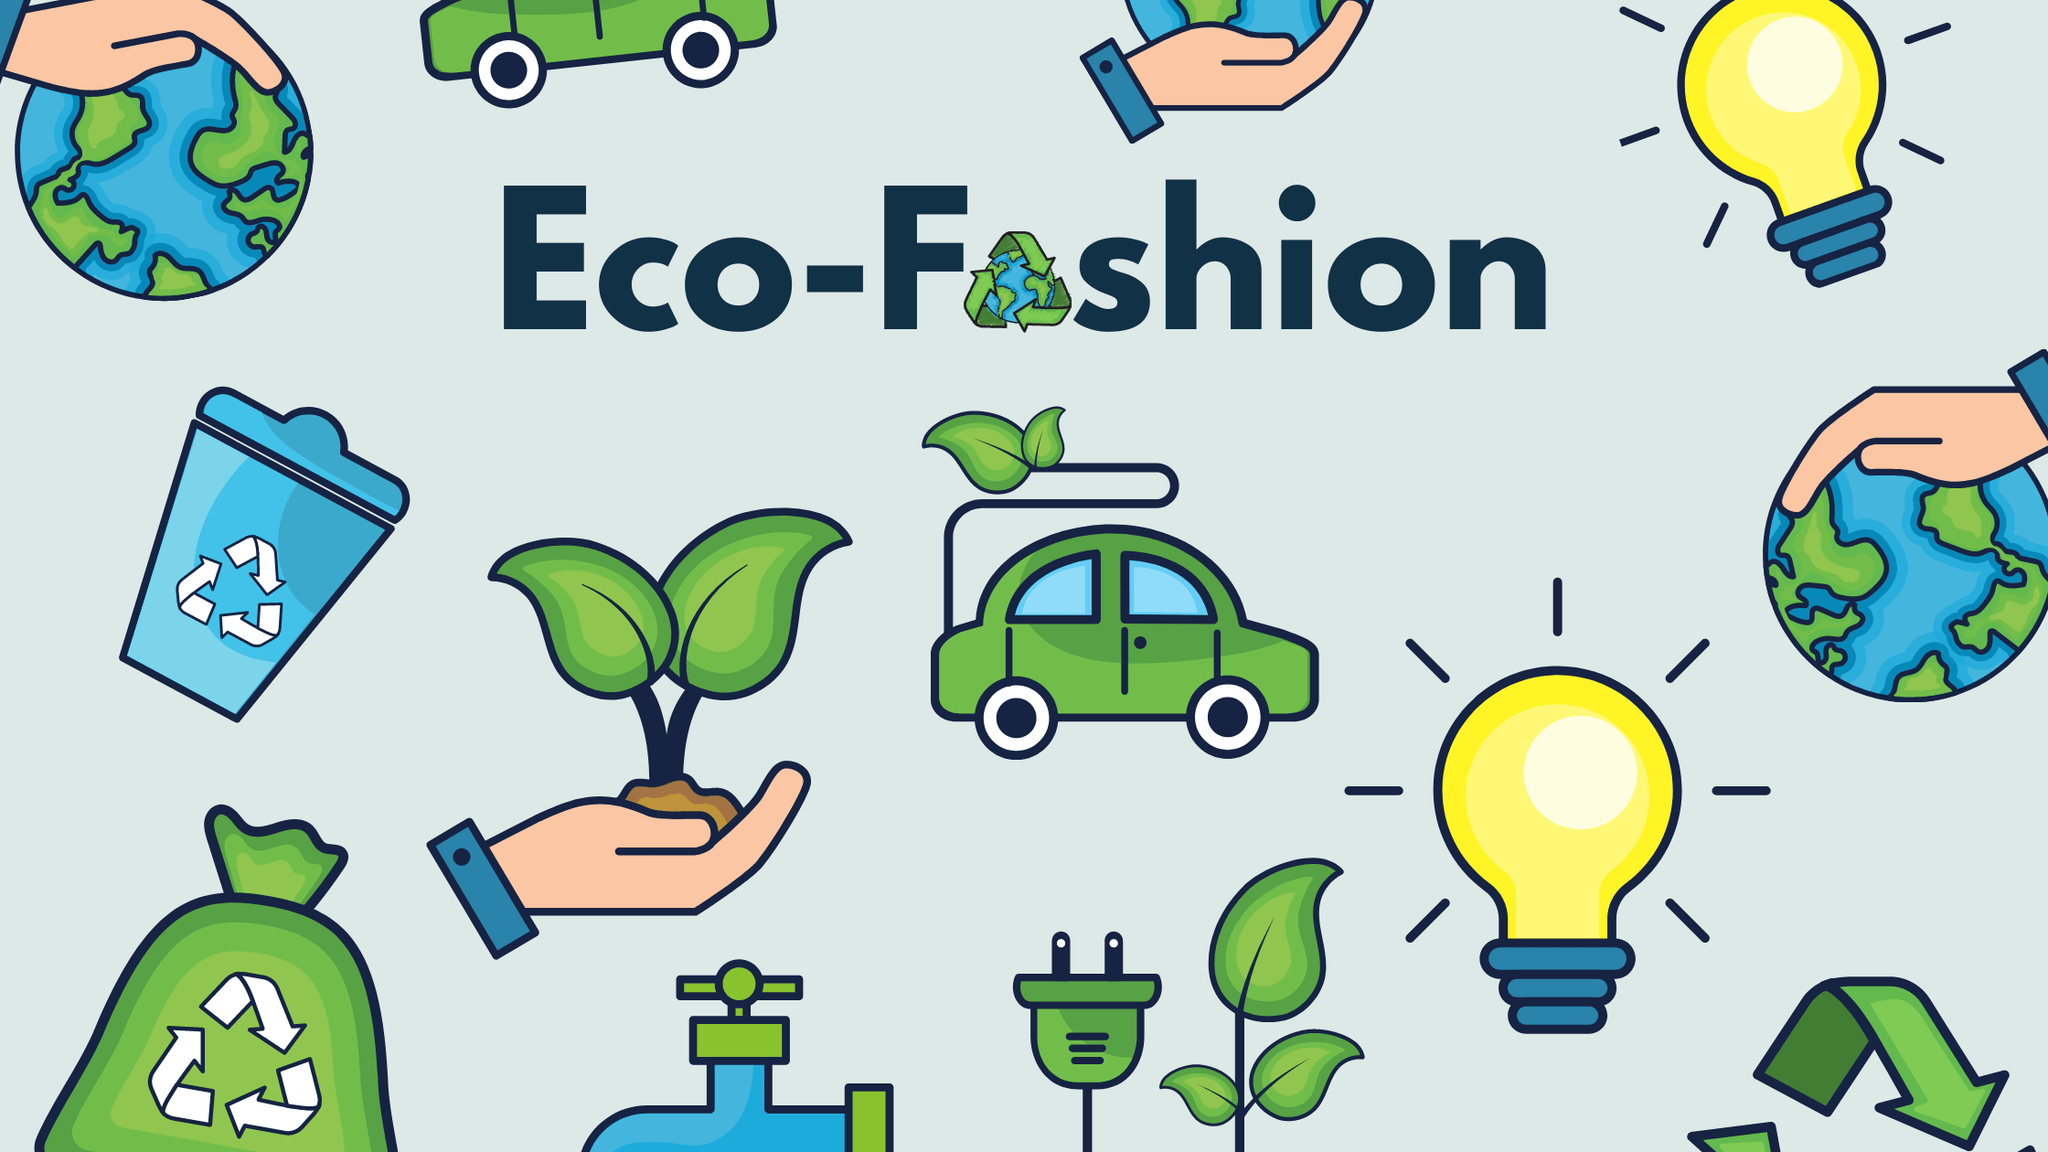 Ethical and sustainable fashion | Why it matters?